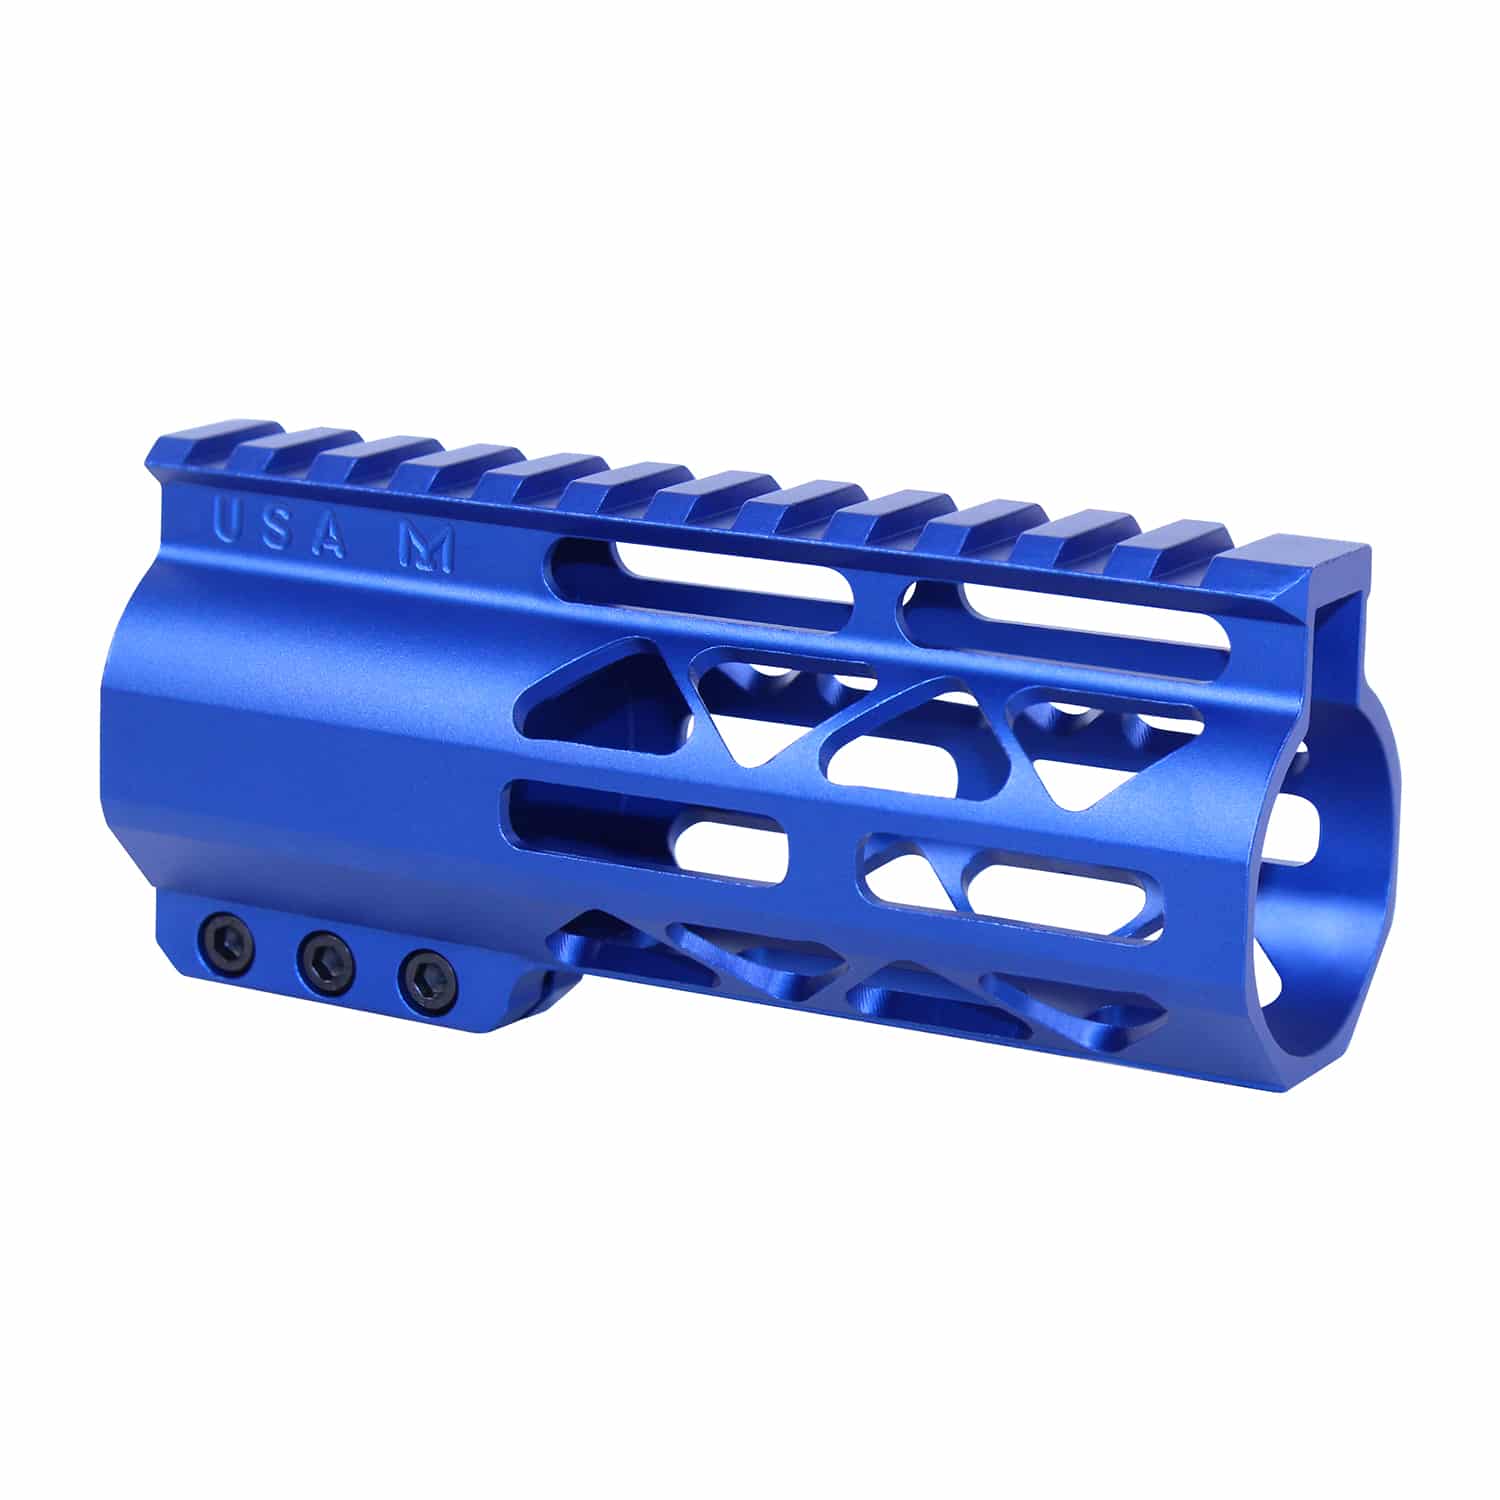 5" AIR-LOK Series M-LOK Compression Free Floating Handguard With Monolithic Top Rail (Anodized Blue)